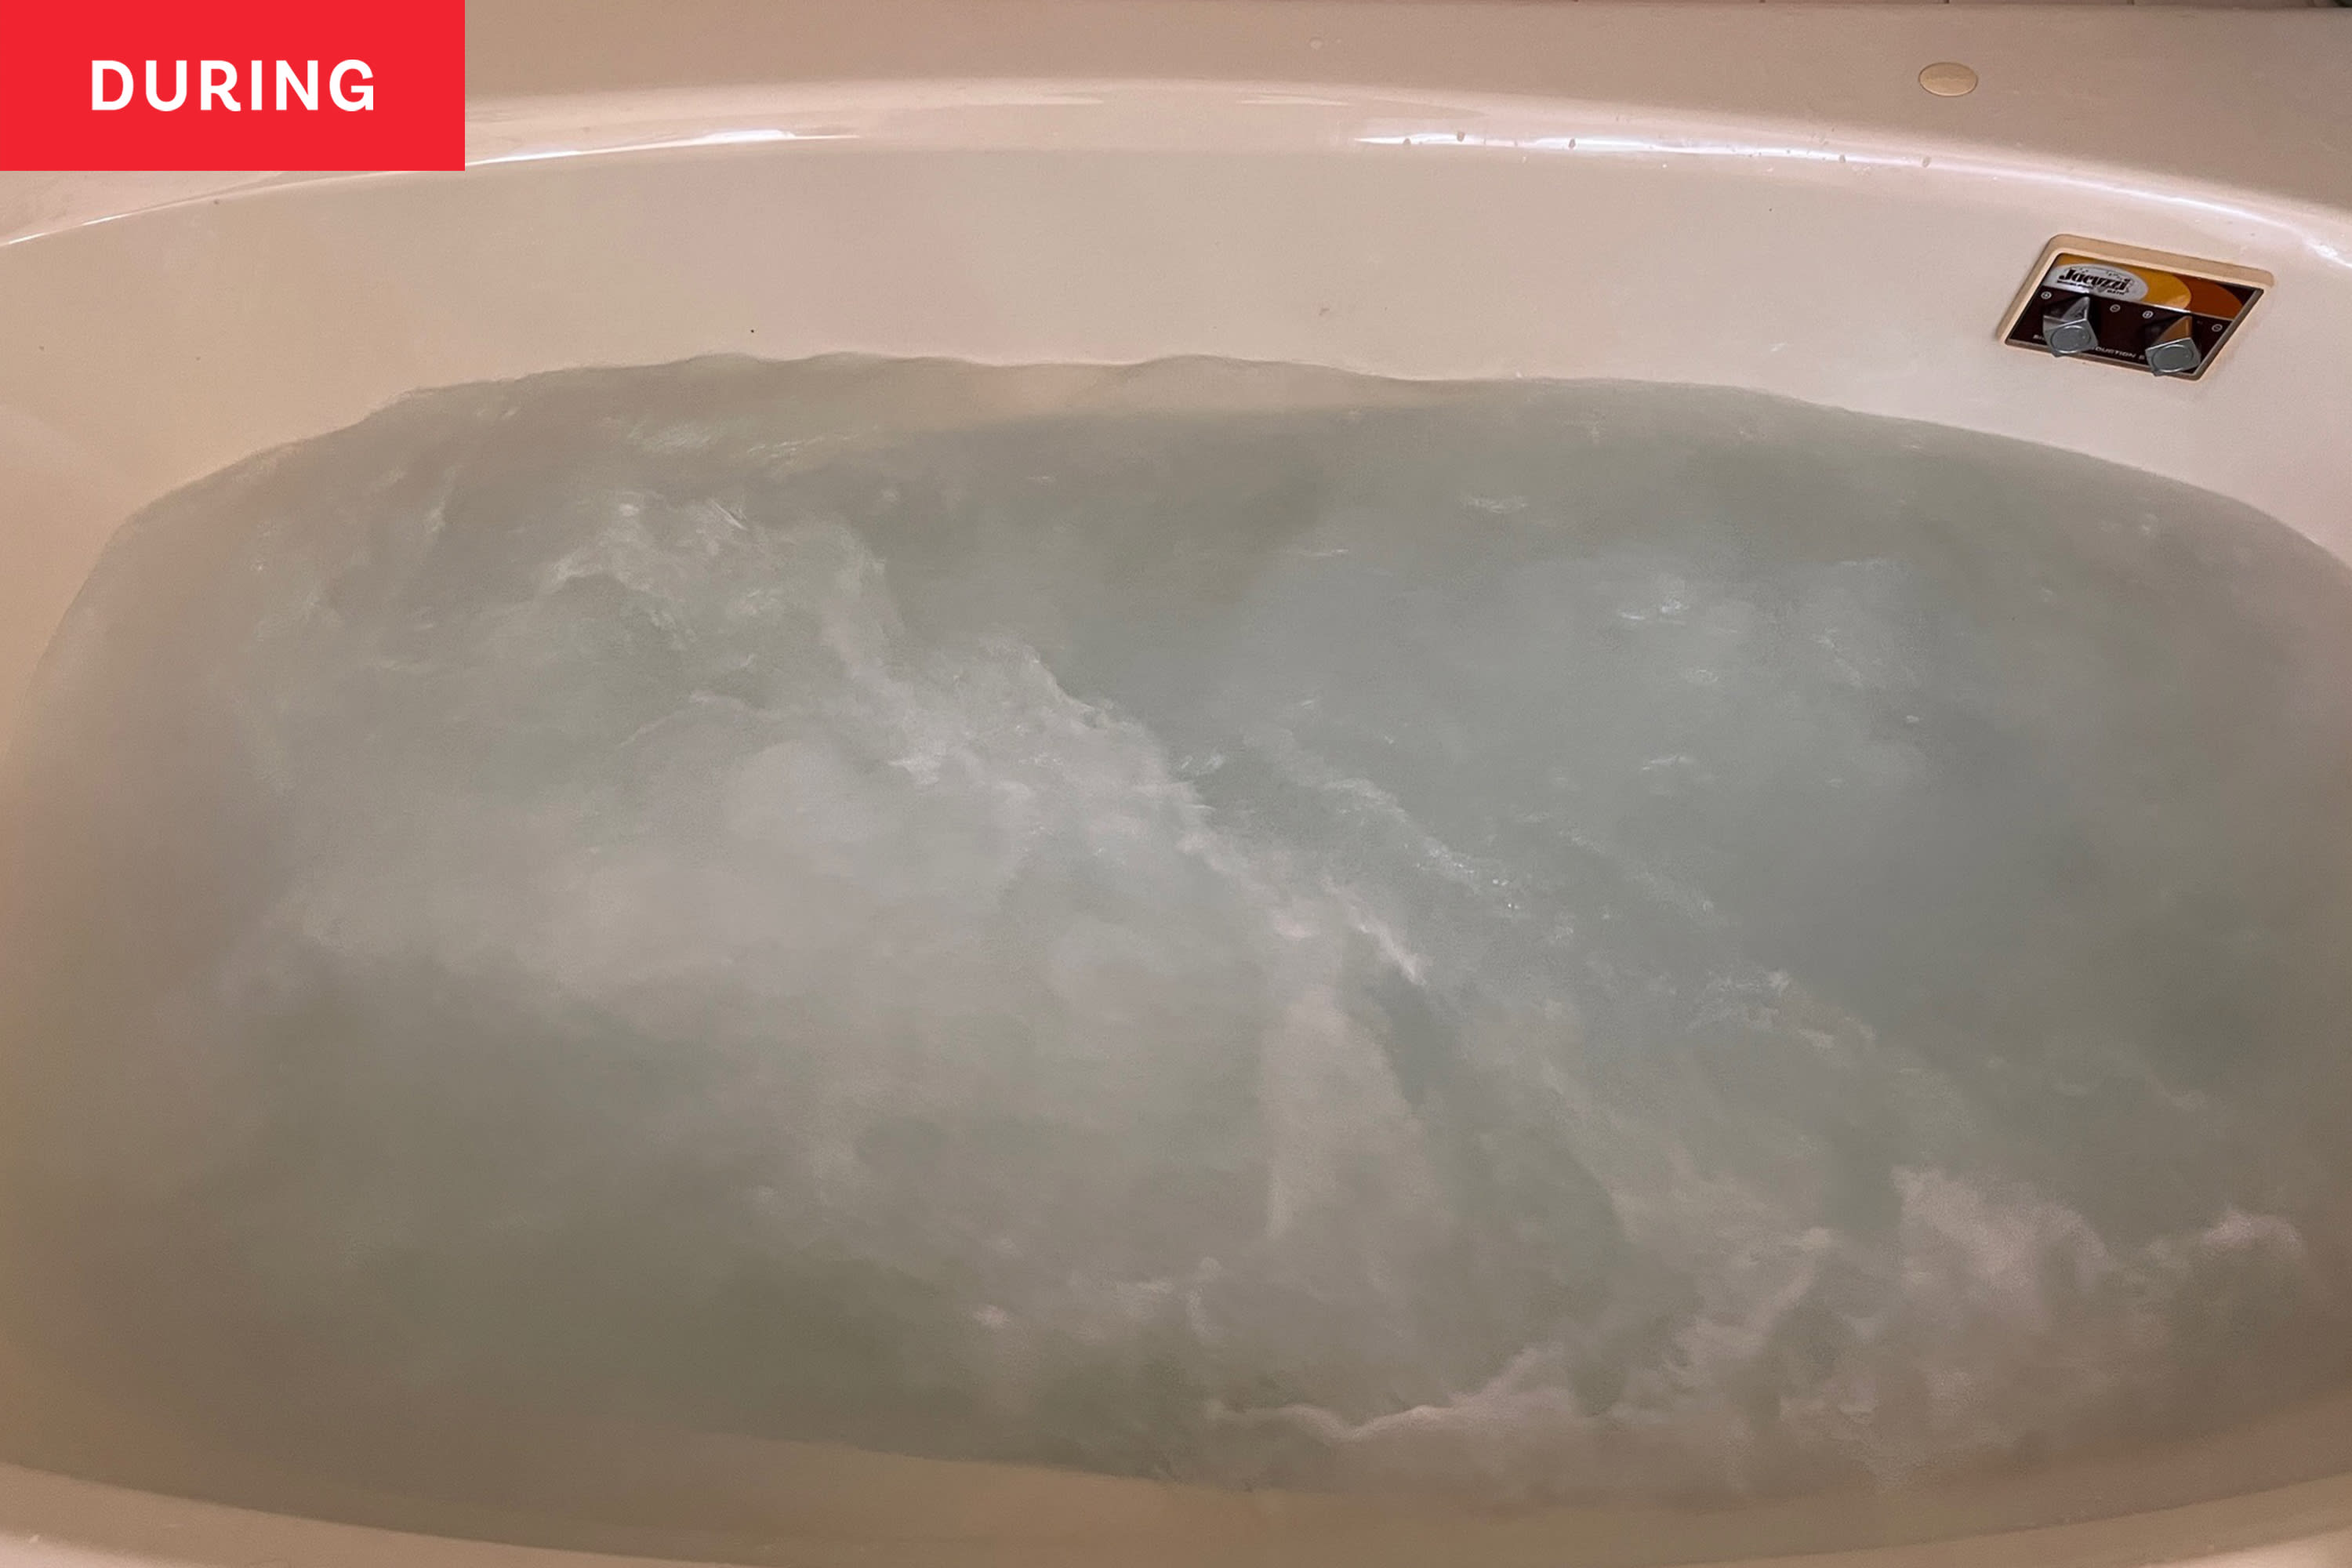 https://cdn.apartmenttherapy.info/image/upload/v1686929137/at/organize-clean/before-after/oh-yuck-jetted-tub-cleaner-review/oh-yuck-jetted-tub-cleaner-review-during.jpg